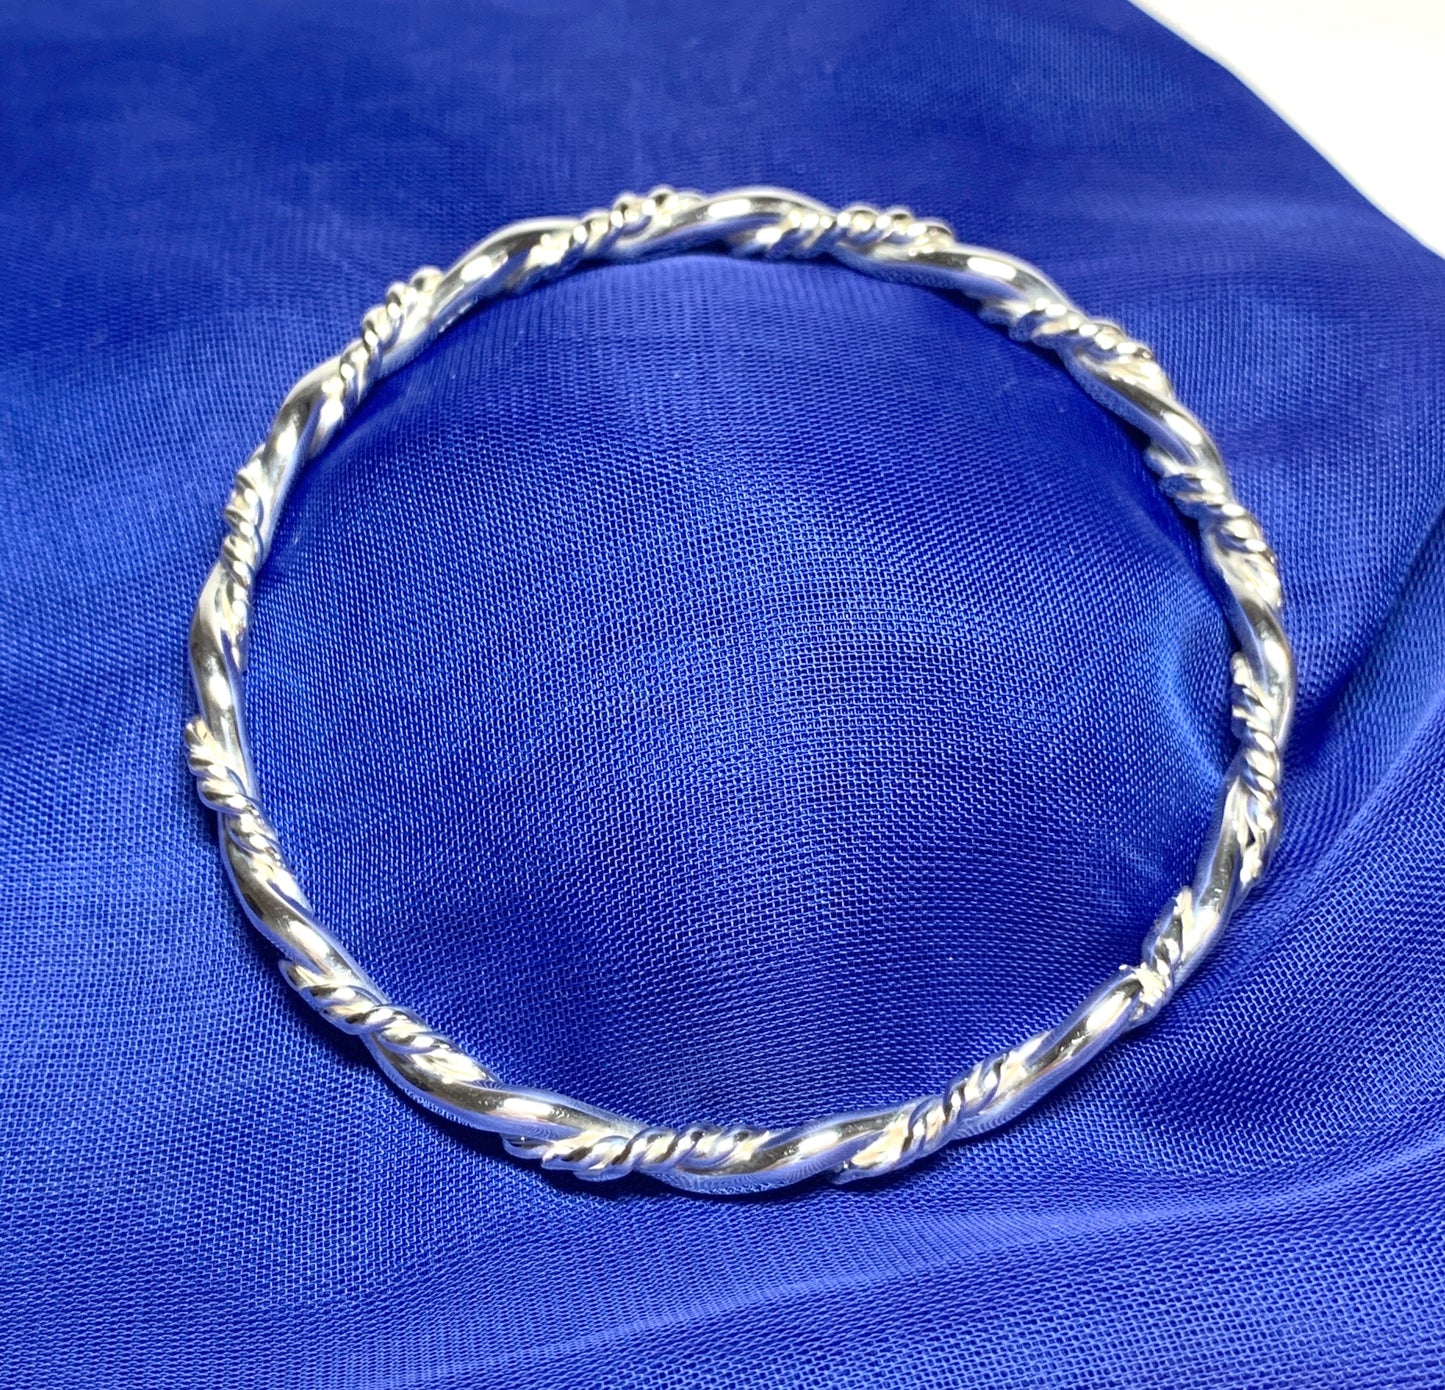 Fancy Bangle heavy sterling silver solid twisted patterned round